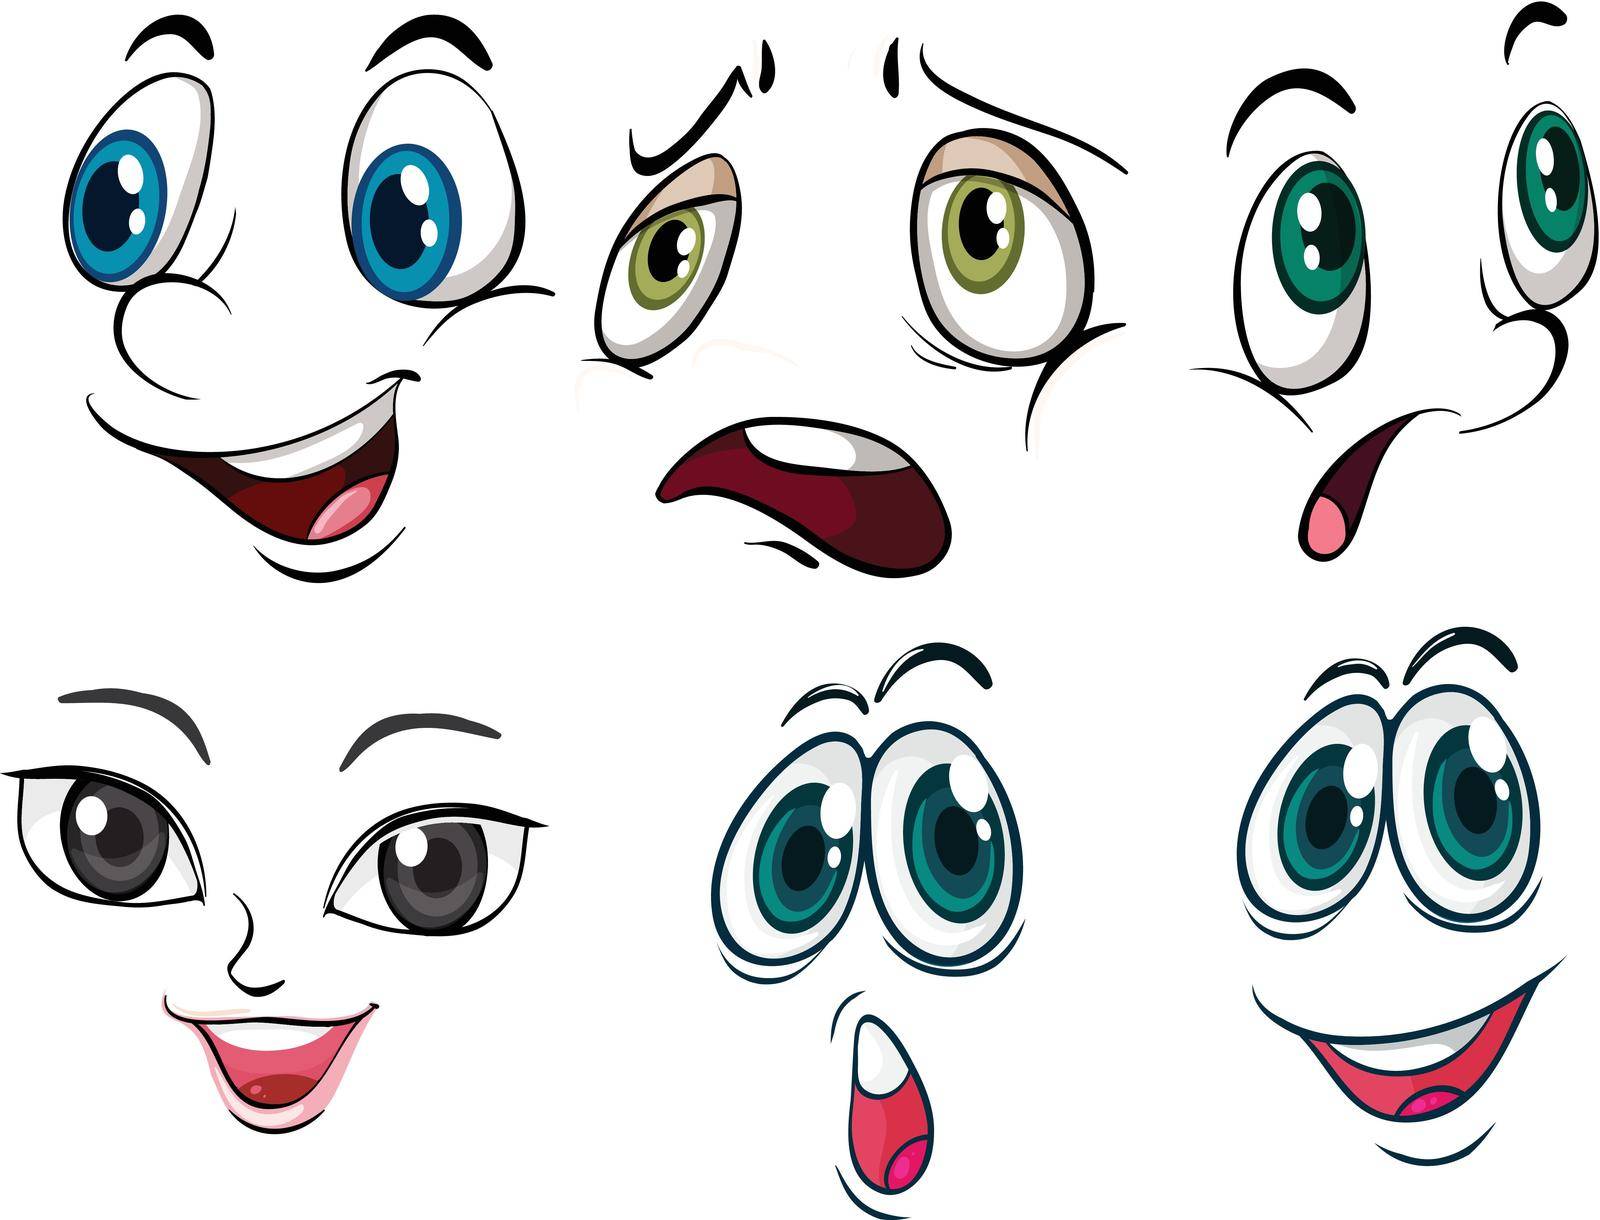 Different facial expressions on a white background